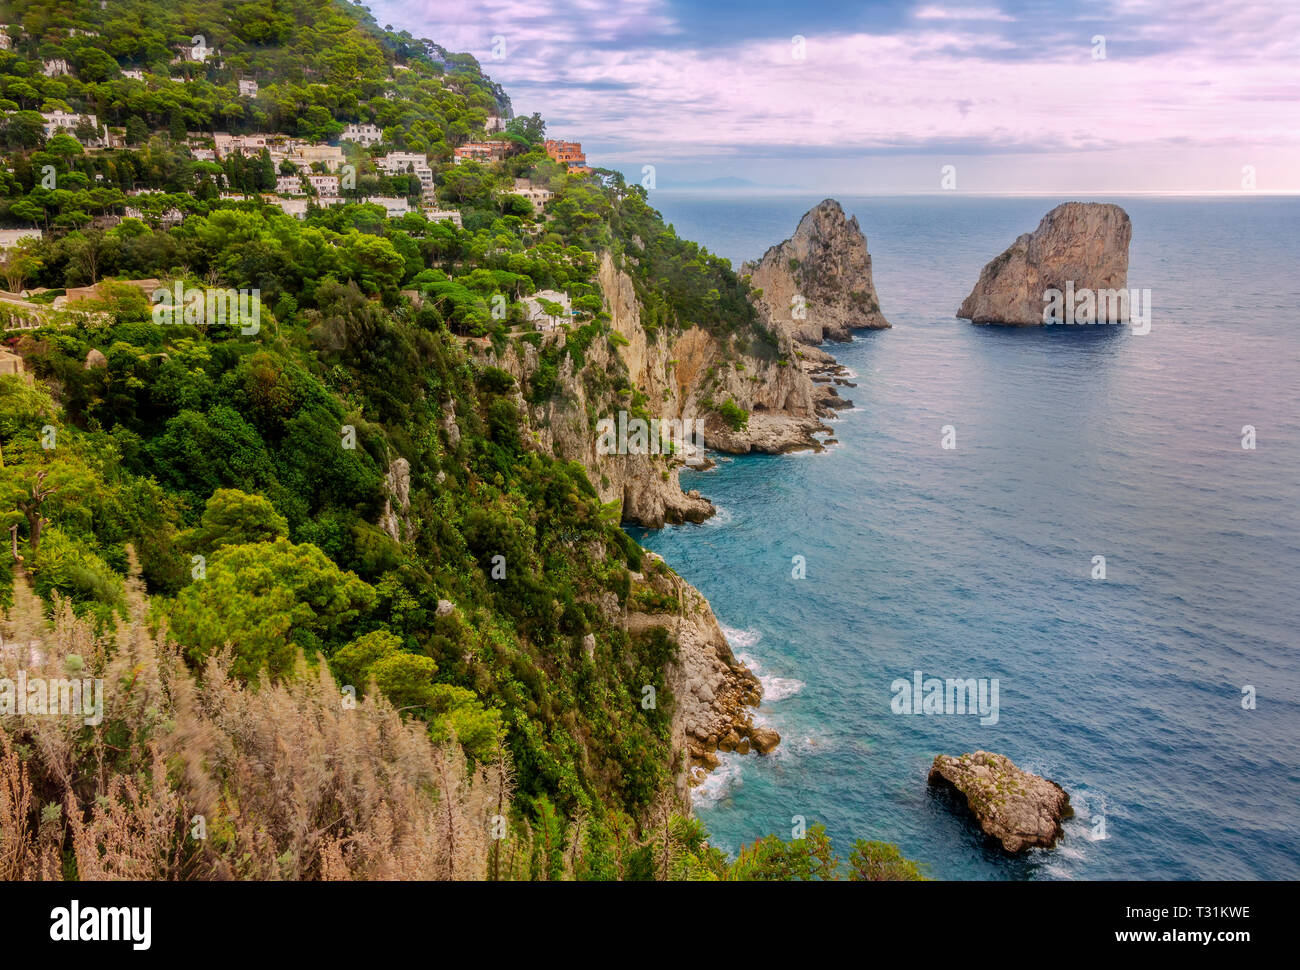 Sea view by Capri island, Italy. The rocks are famous as Faraglioni rock. Locals say that they have seen sirens on this rock and often hear their whis Stock Photo